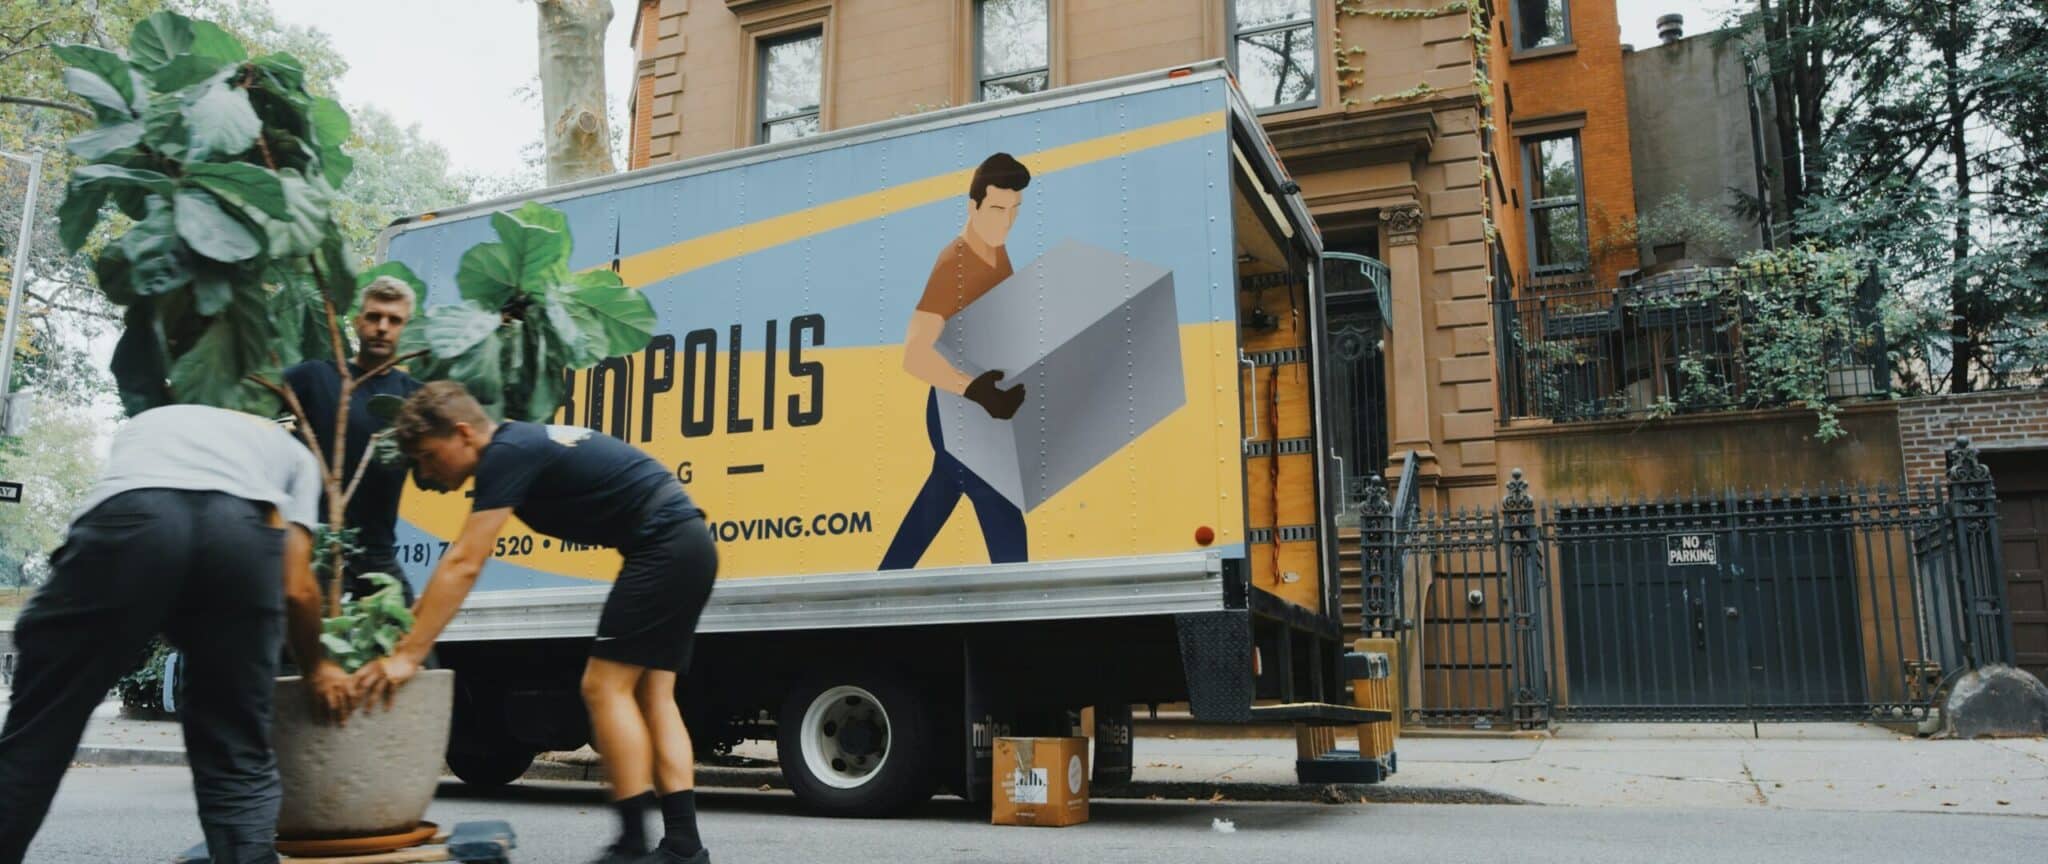 hiring a moving company - featured image